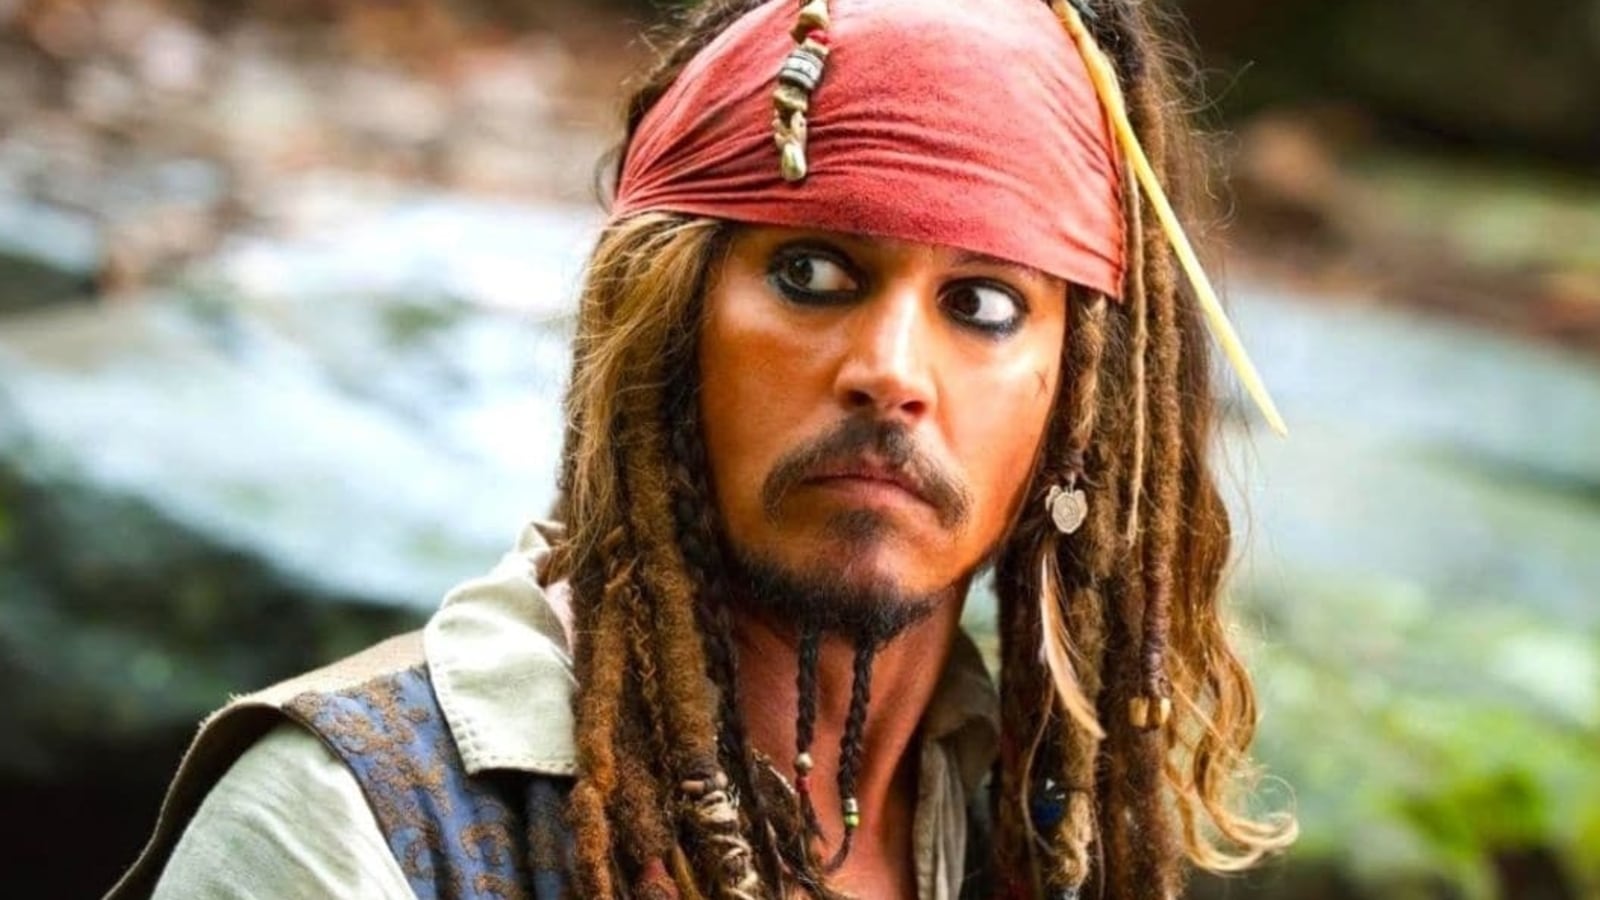 Johnny Depp transforms into Jack Sparrow for fans outside courthouse. Watch | Hollywood - Hindustan Times